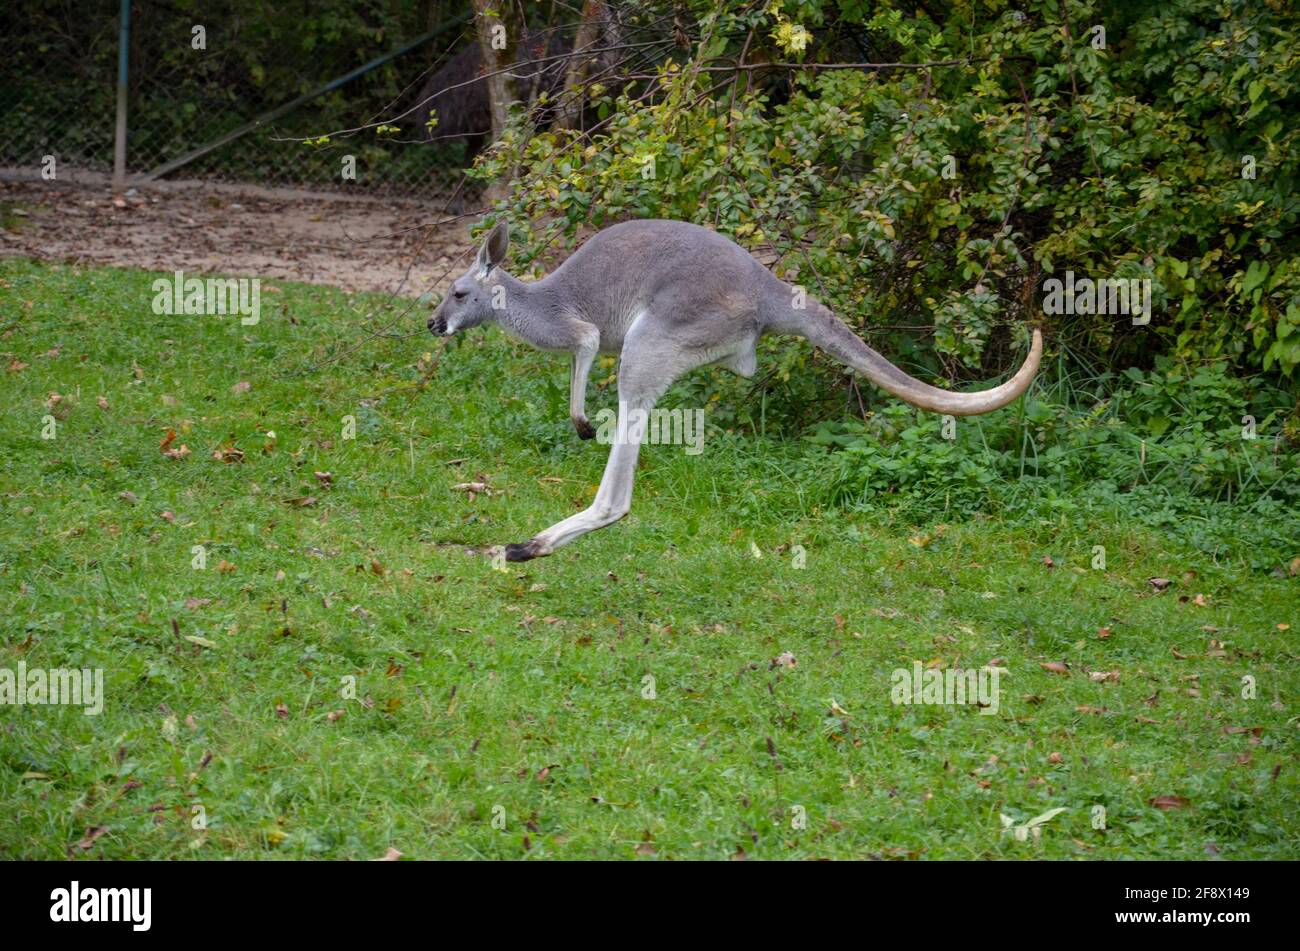 Jumping kangaroo from the zoo in Munich Stock Photo